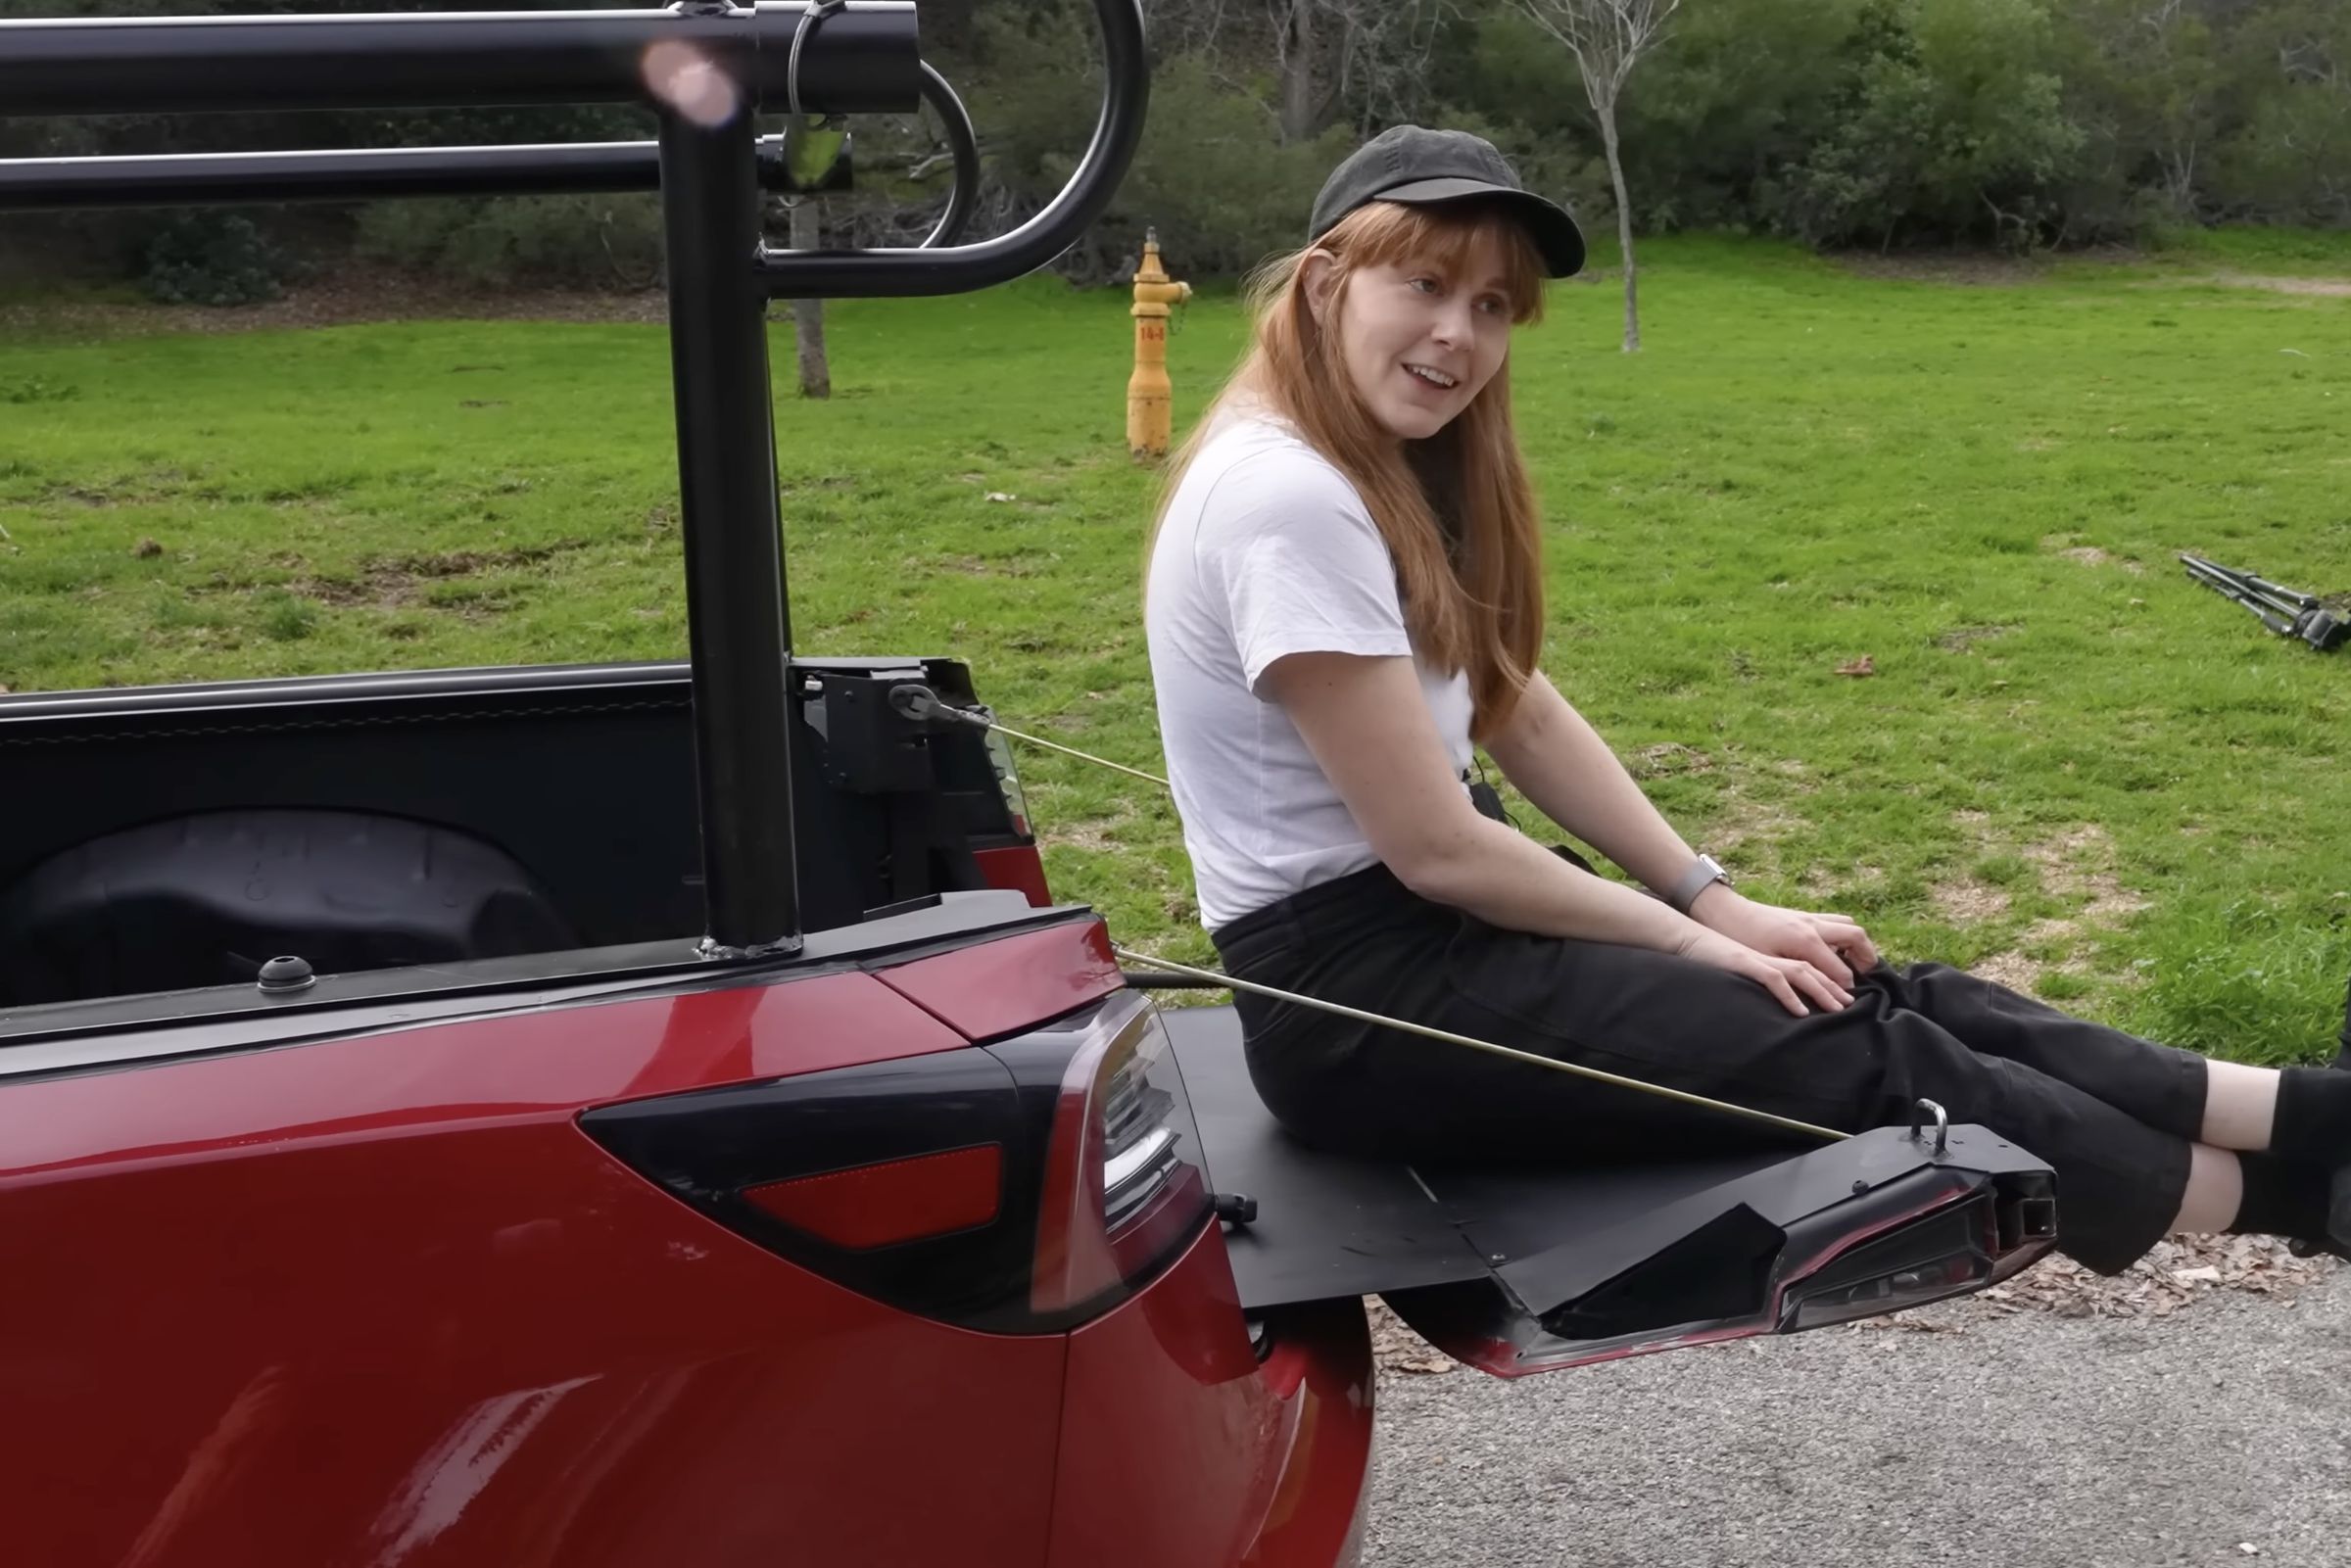 Simone Giertz sits on the end of the Truckla bed while it’s fully extended